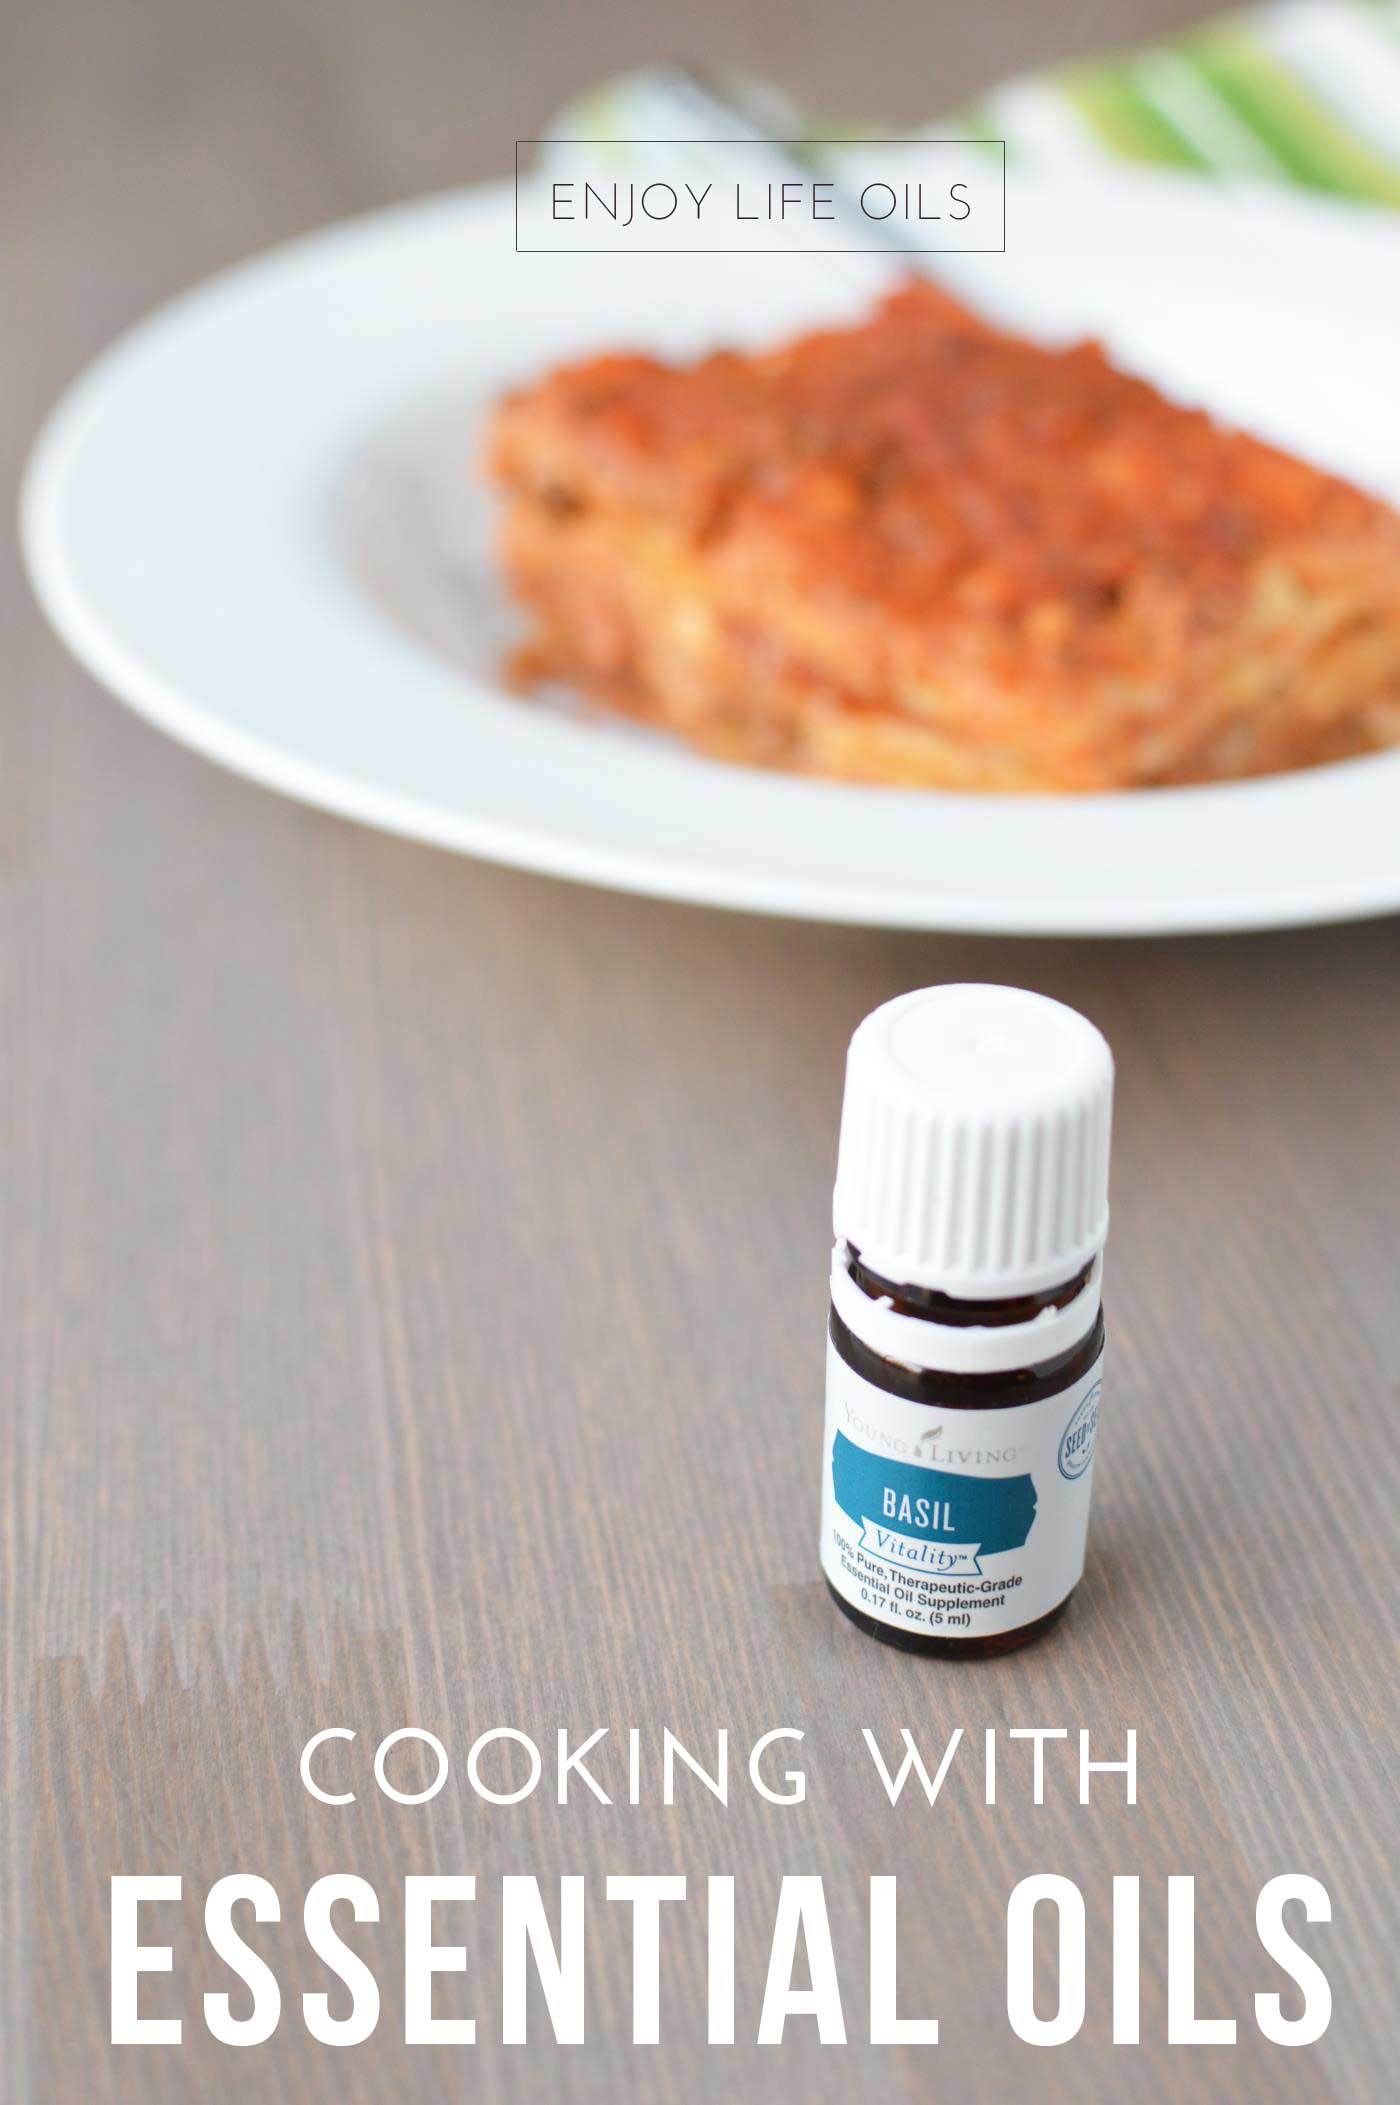 Cooking with essential oils: basil lasagna recipe with Young Living's Basil Vitality essential oil. Via @skimbaco